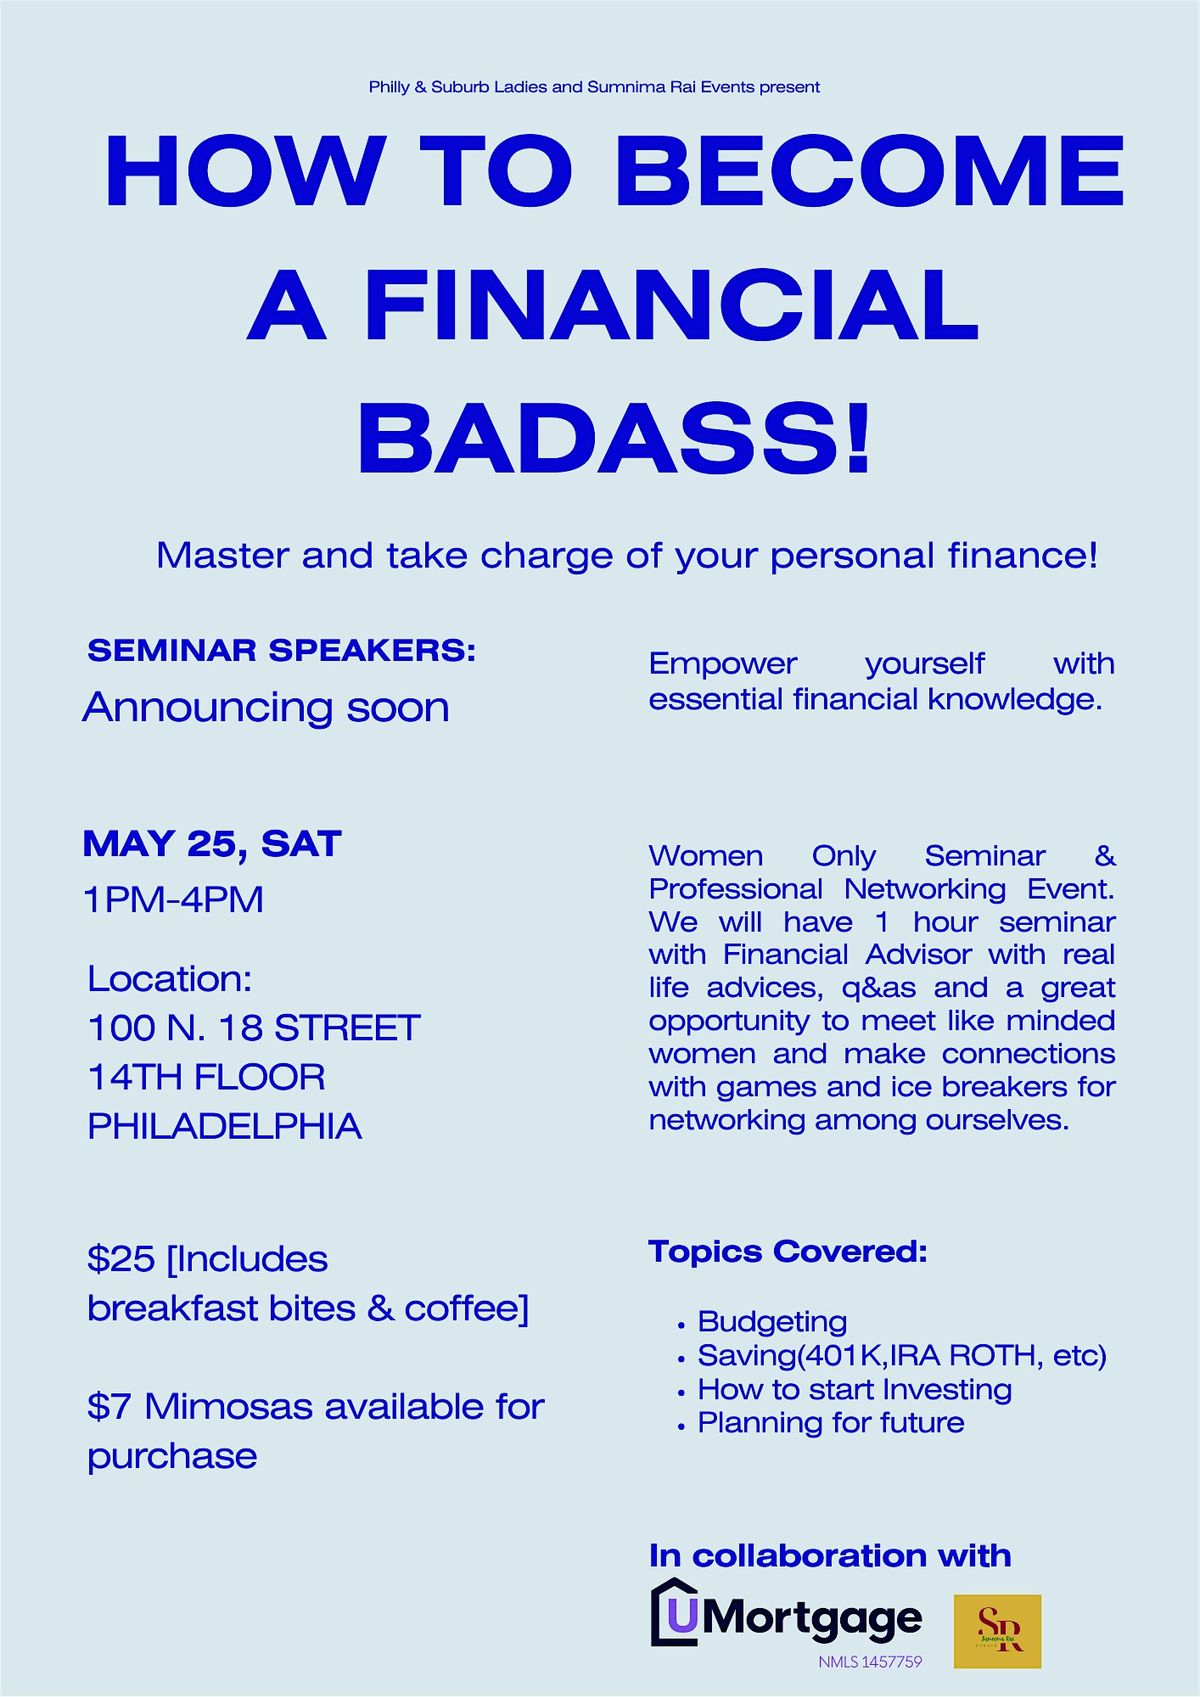 How to Become a Financial Badass!